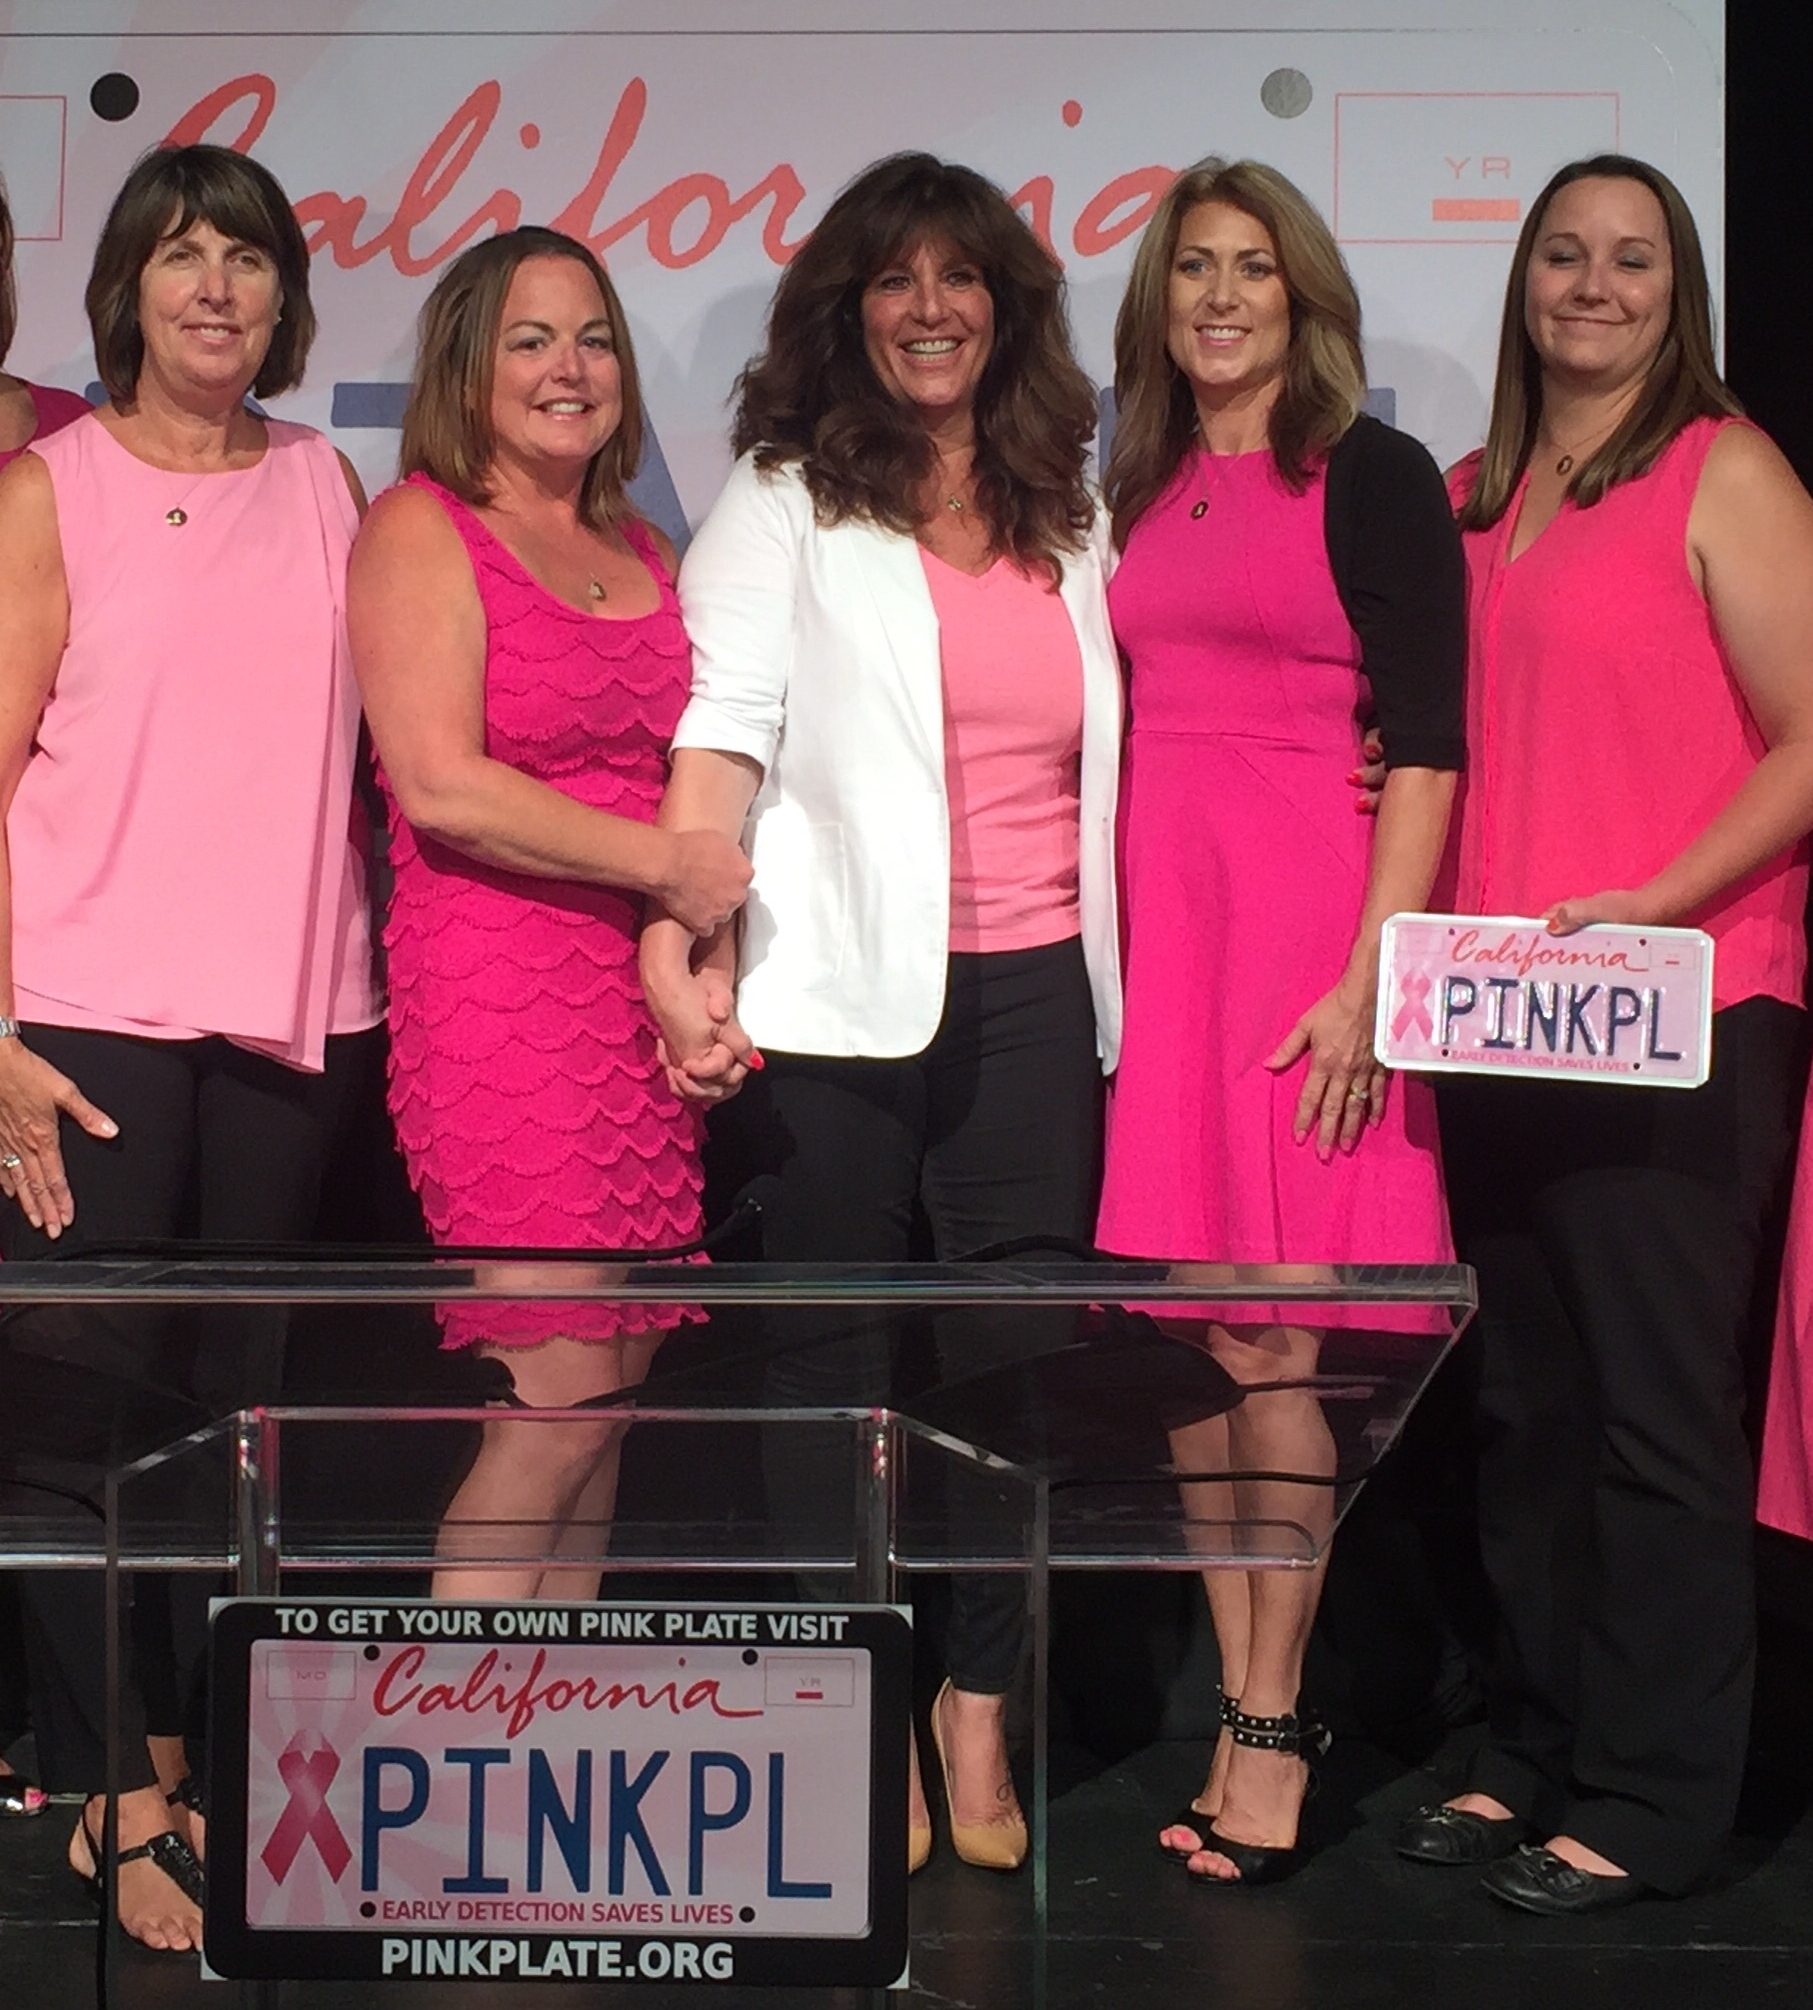 Pink Plate co-founders, Carla Kimball (center) and Survivor Sisters of Contra Costa County (L-R) Deborah Bordeau, Heather McCullough, Chere Rush and Heather Solari. photo courtesy of pinkplate.org